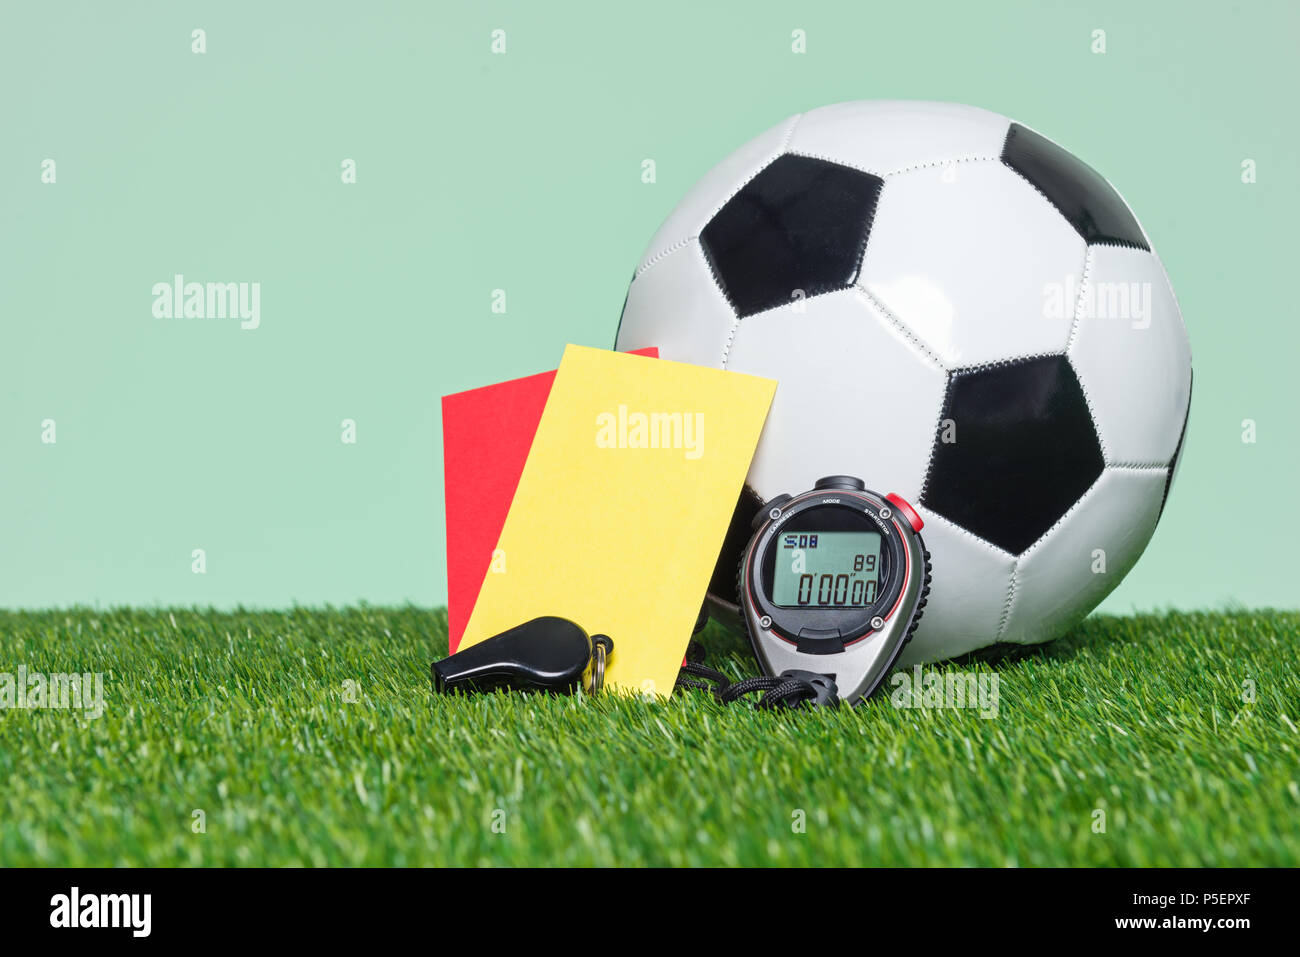 Football or Soccer Referee equipmnt and ball on grass with green background. Stock Photo